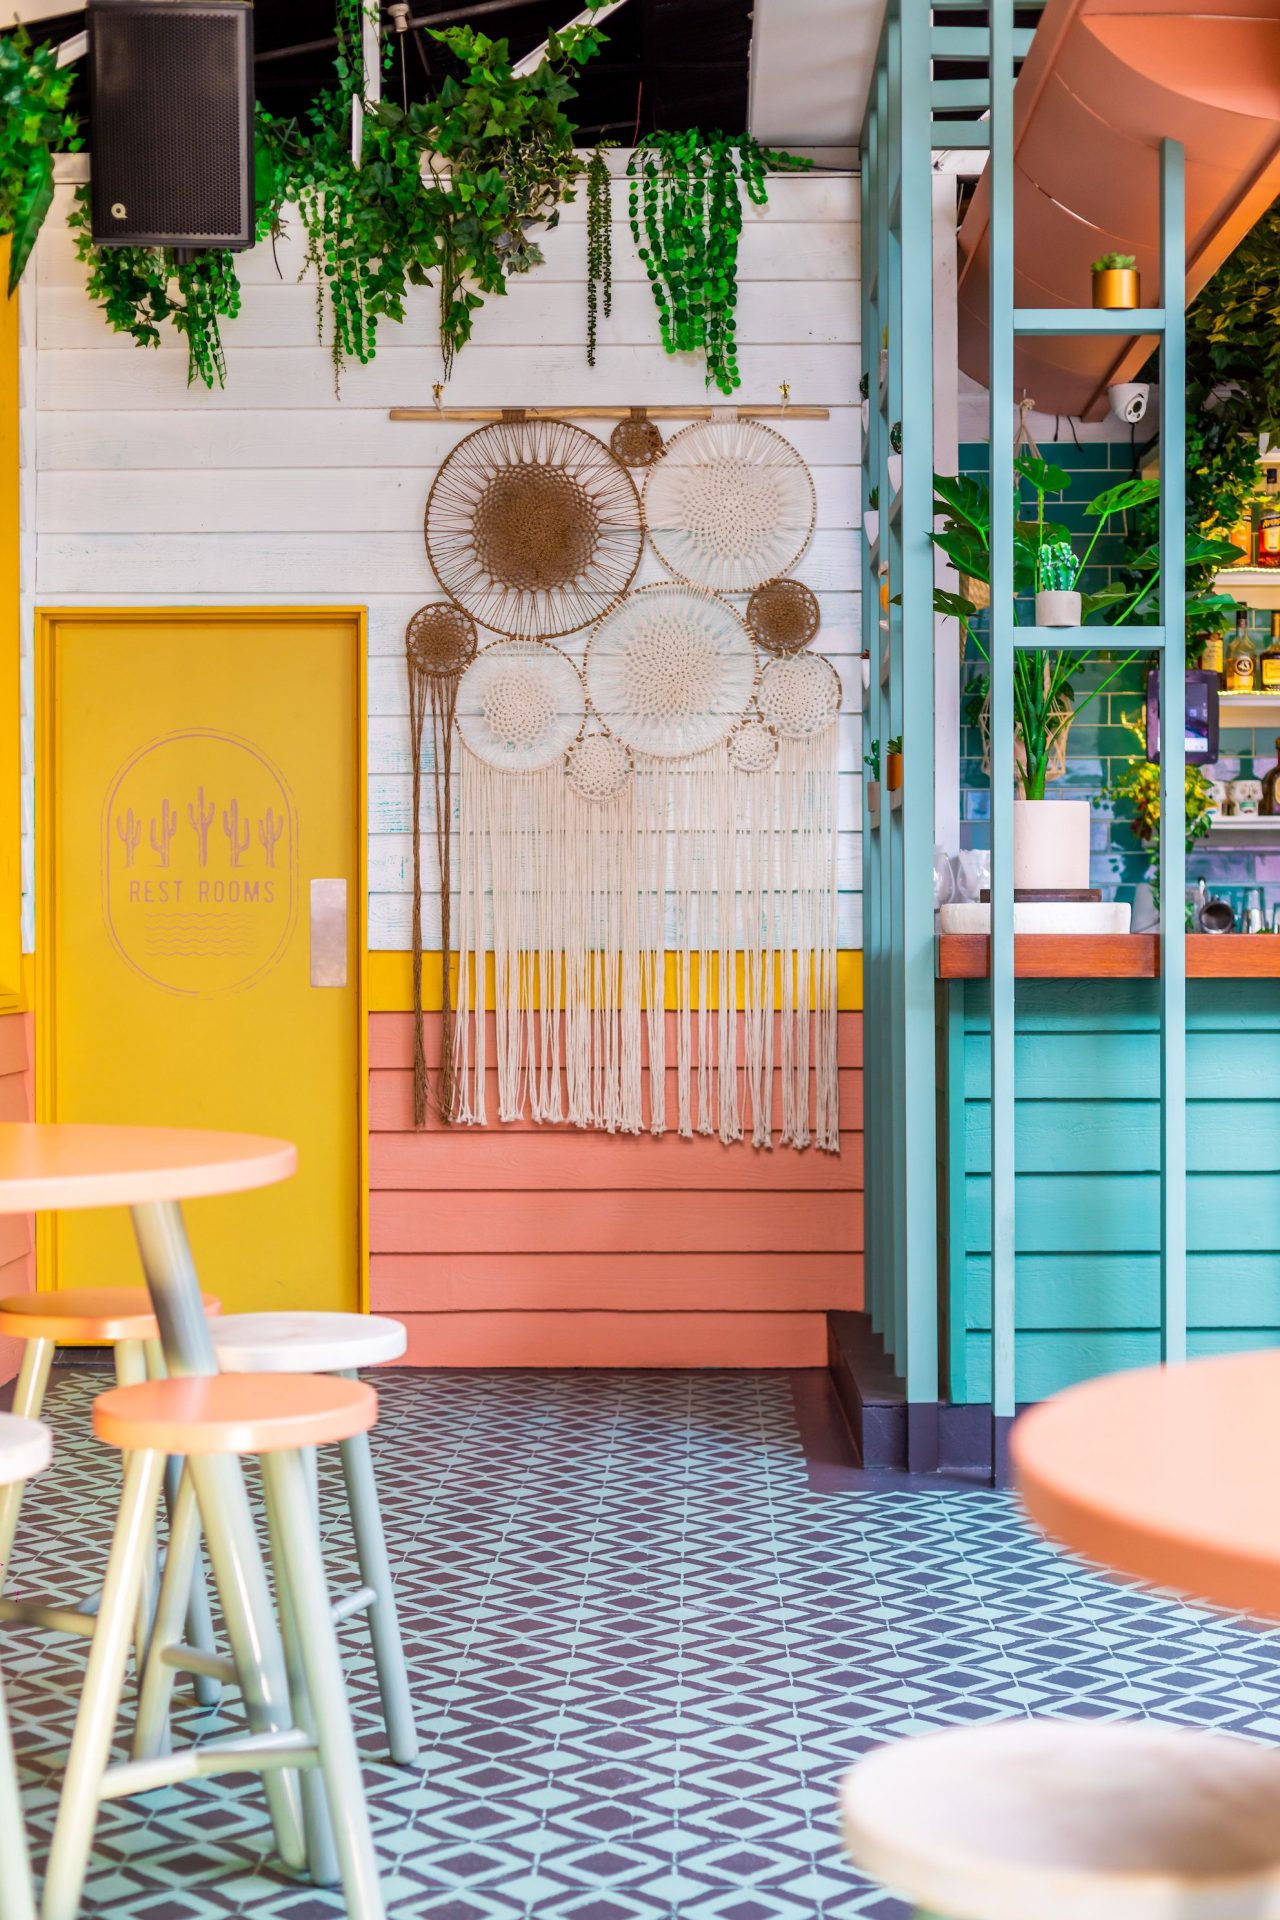 Plasma Nodo Have Designed Soft Touch, A Colorful Ice Cream Store In Colombia